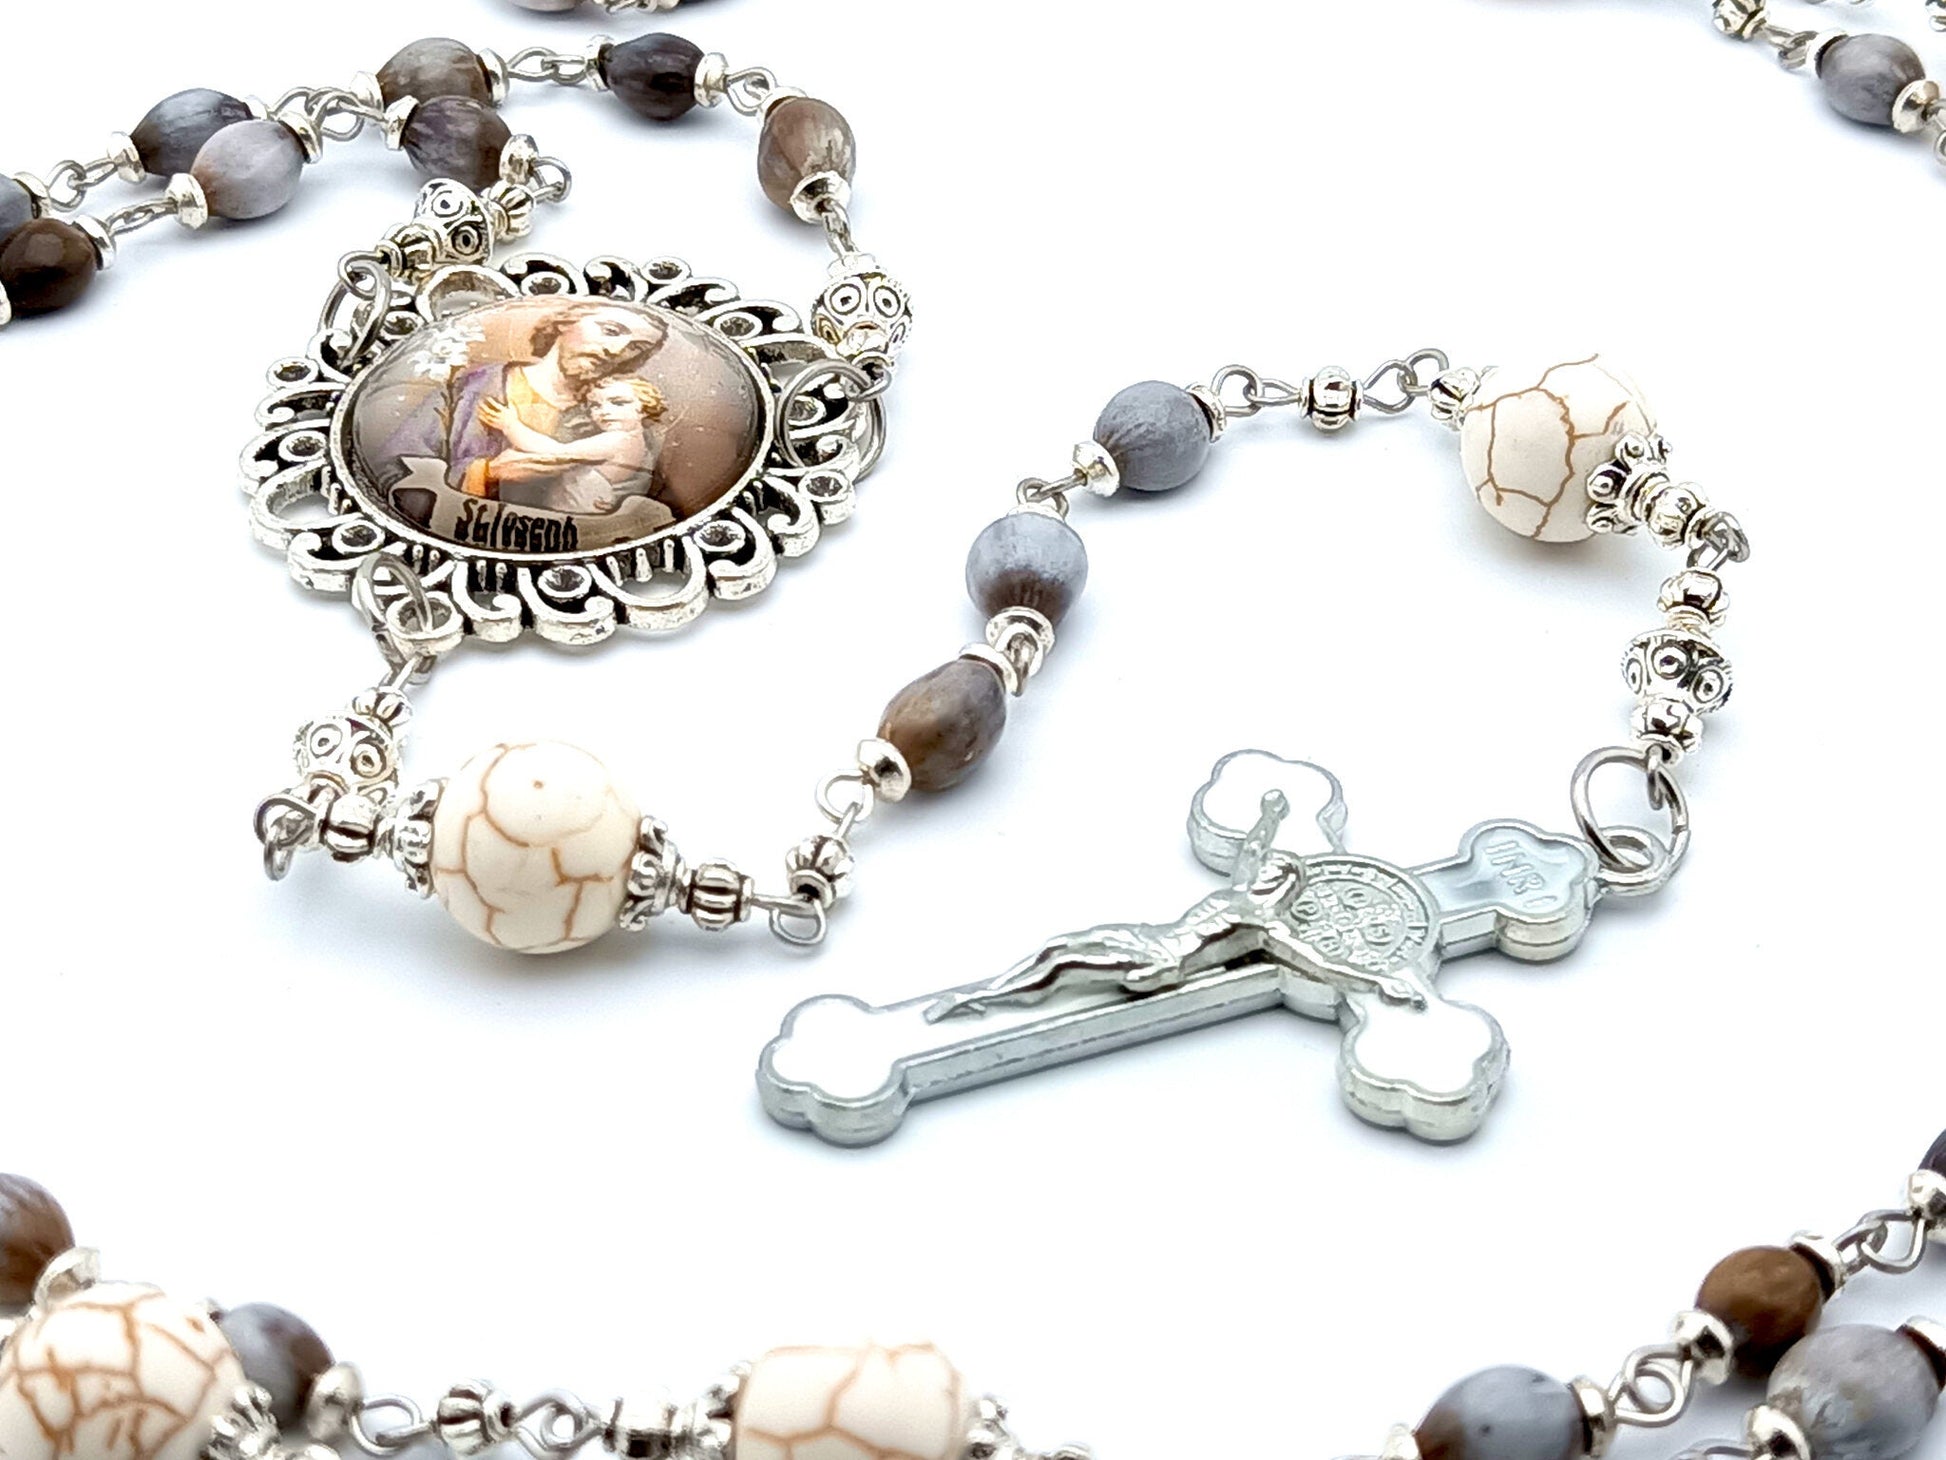 Saint Joseph unique rosary beads with Jobs Tears and gemstone beads, white enamel Saint benedict crucifix and large picture centre medal.